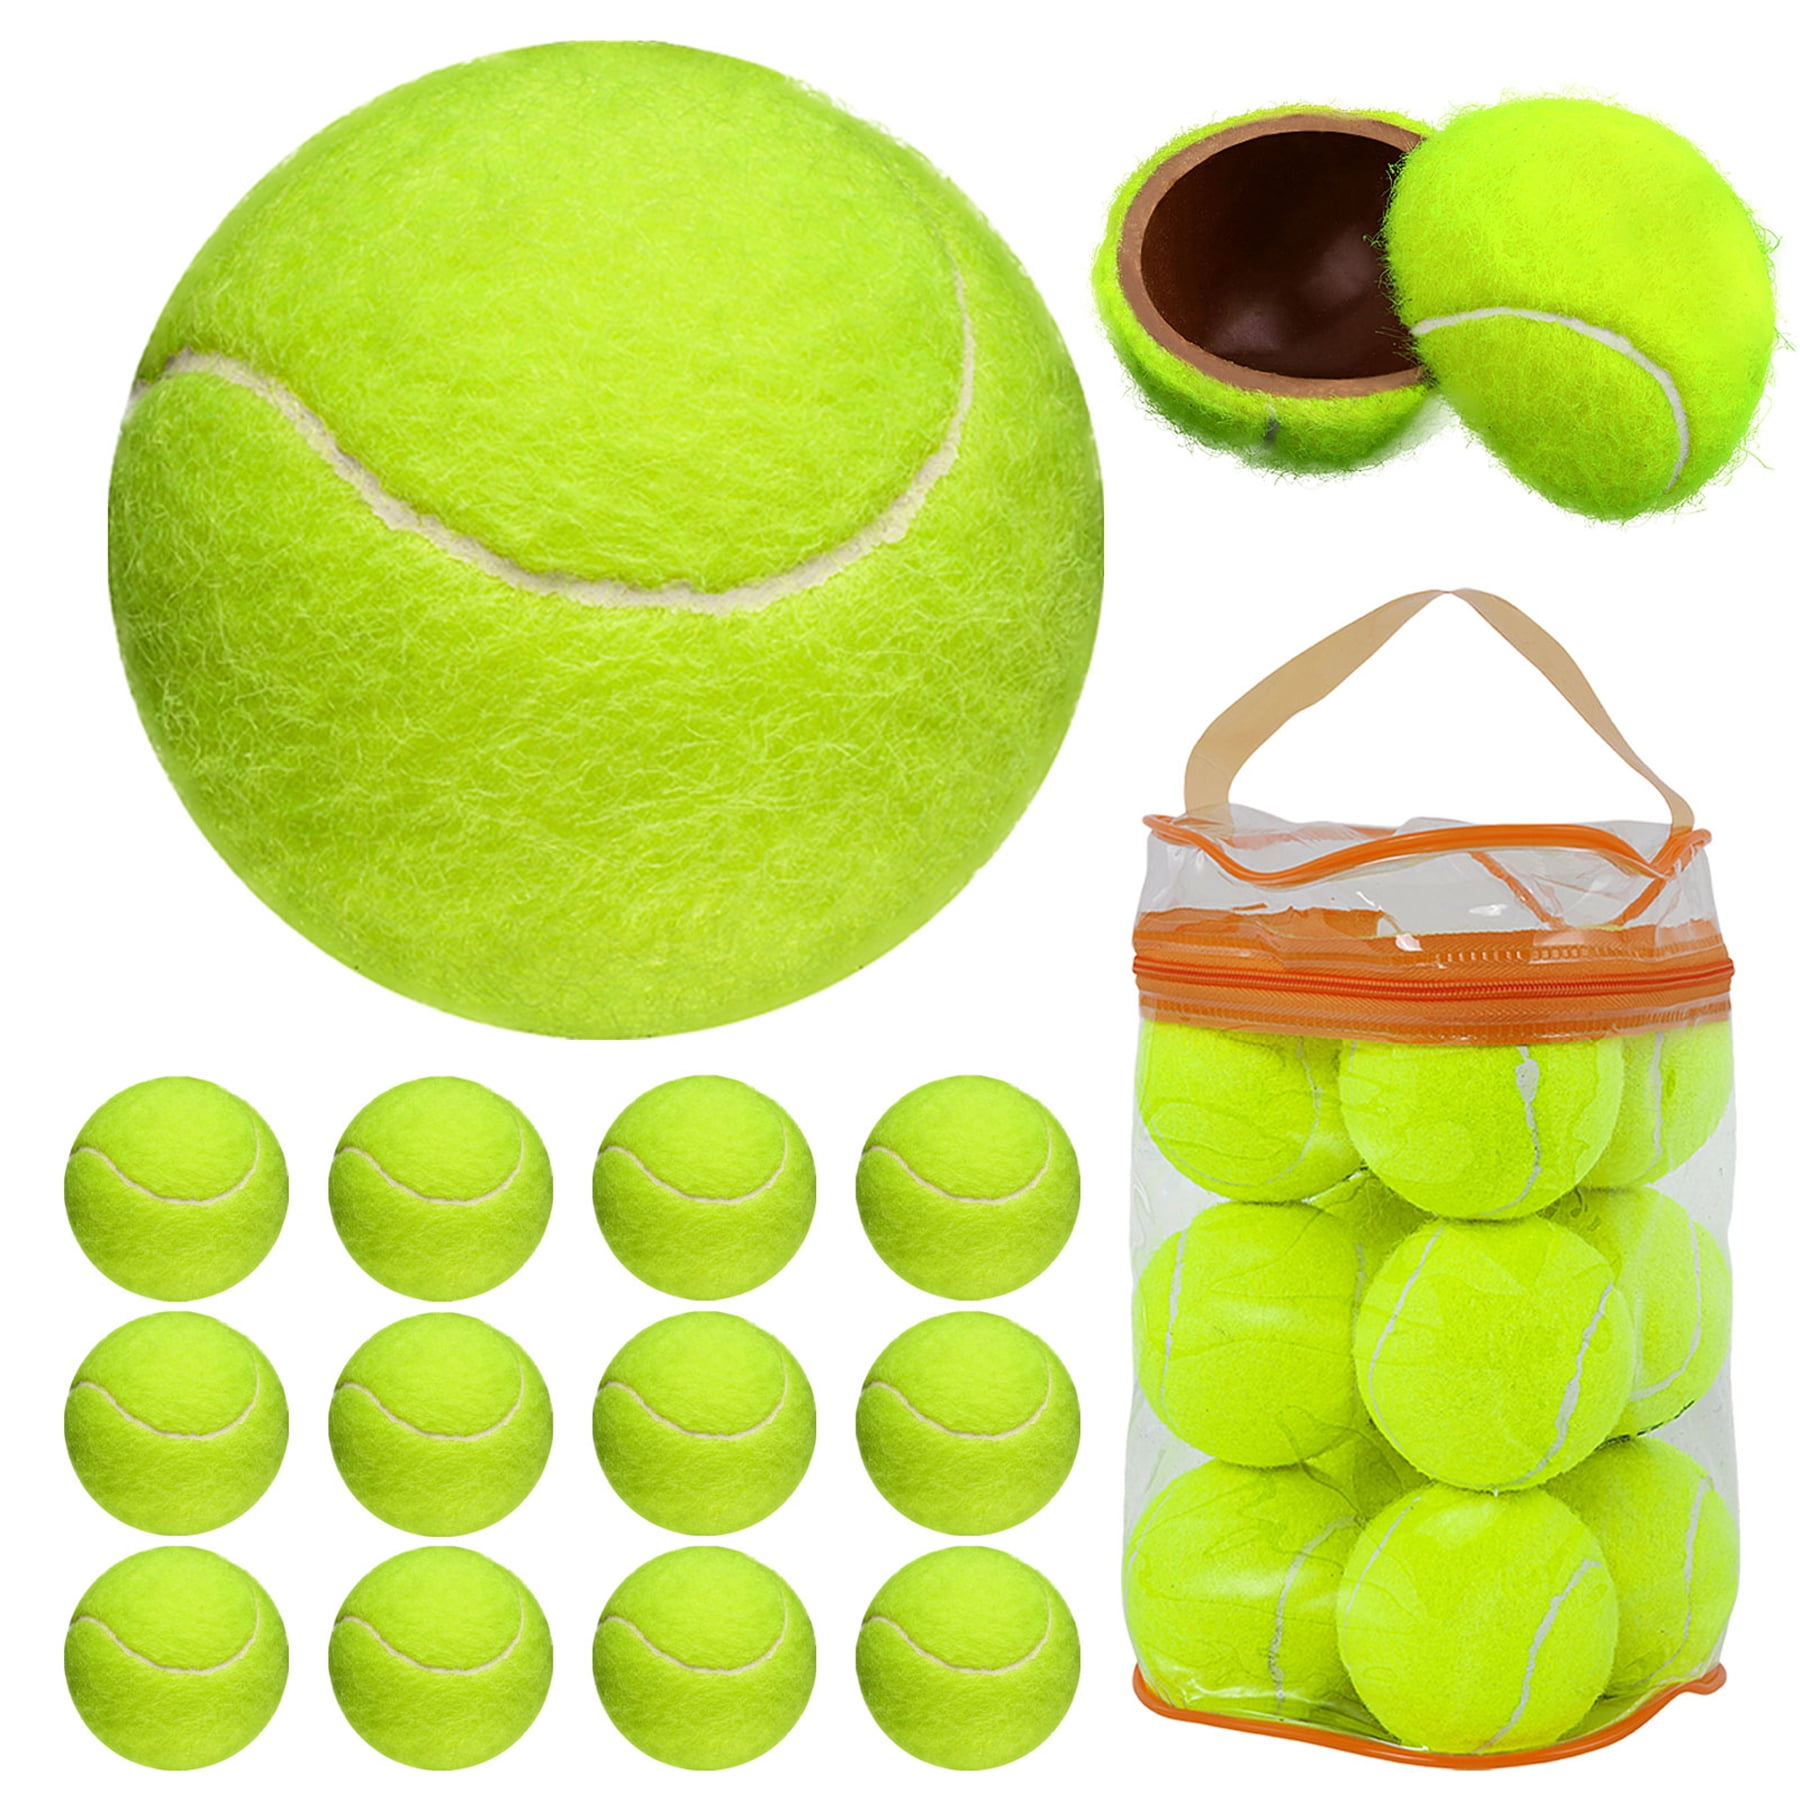 25 Used Low Compression Tennis Balls Green Dot Dog Fetch Toy Chairs Practice 